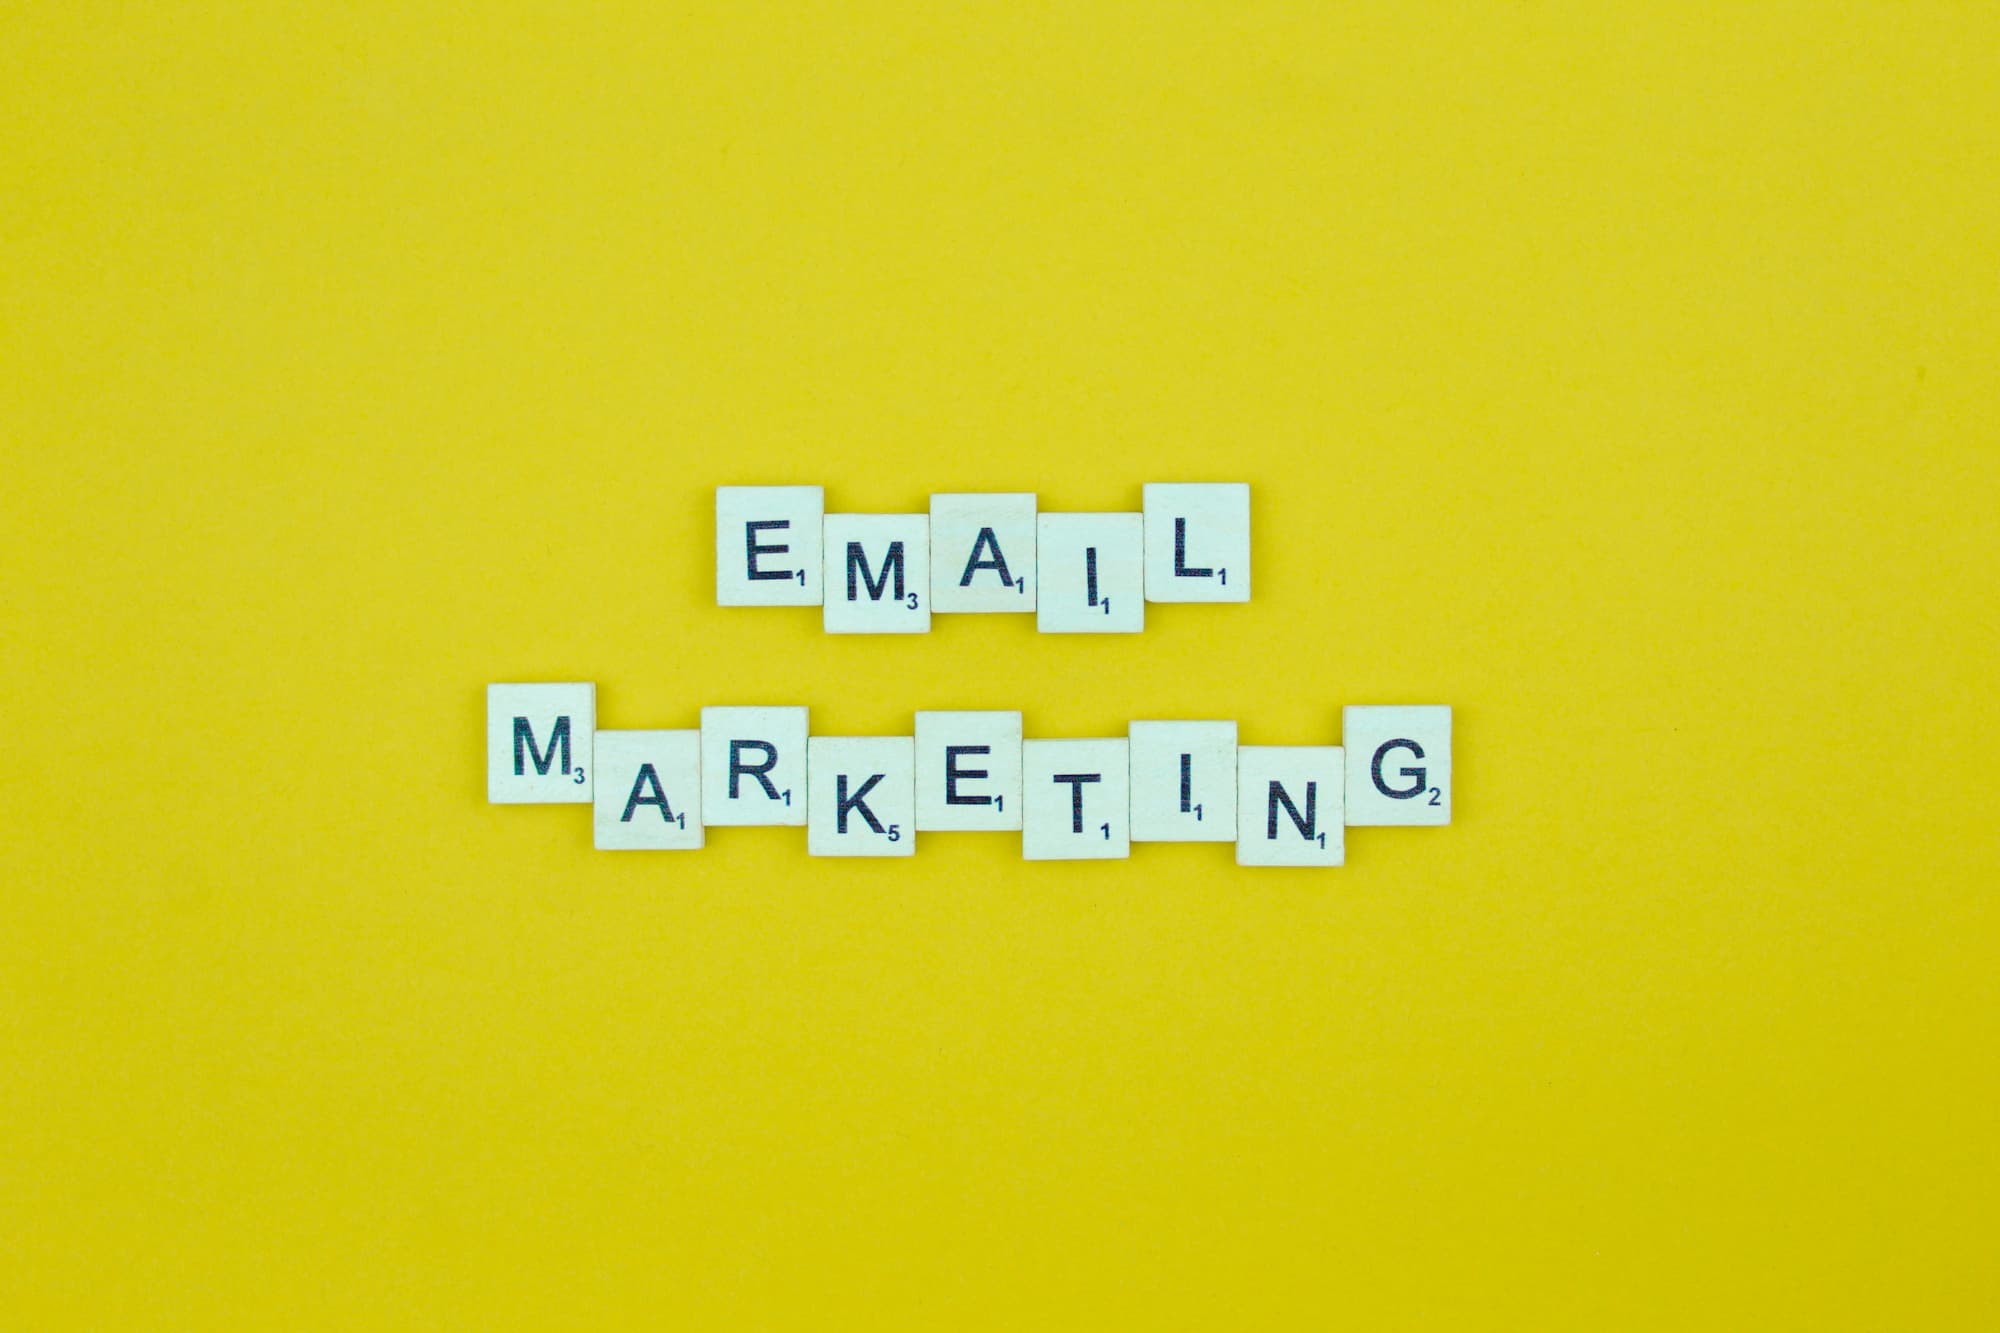 How You Can Use an Email List to Build Connections and Convert Them.